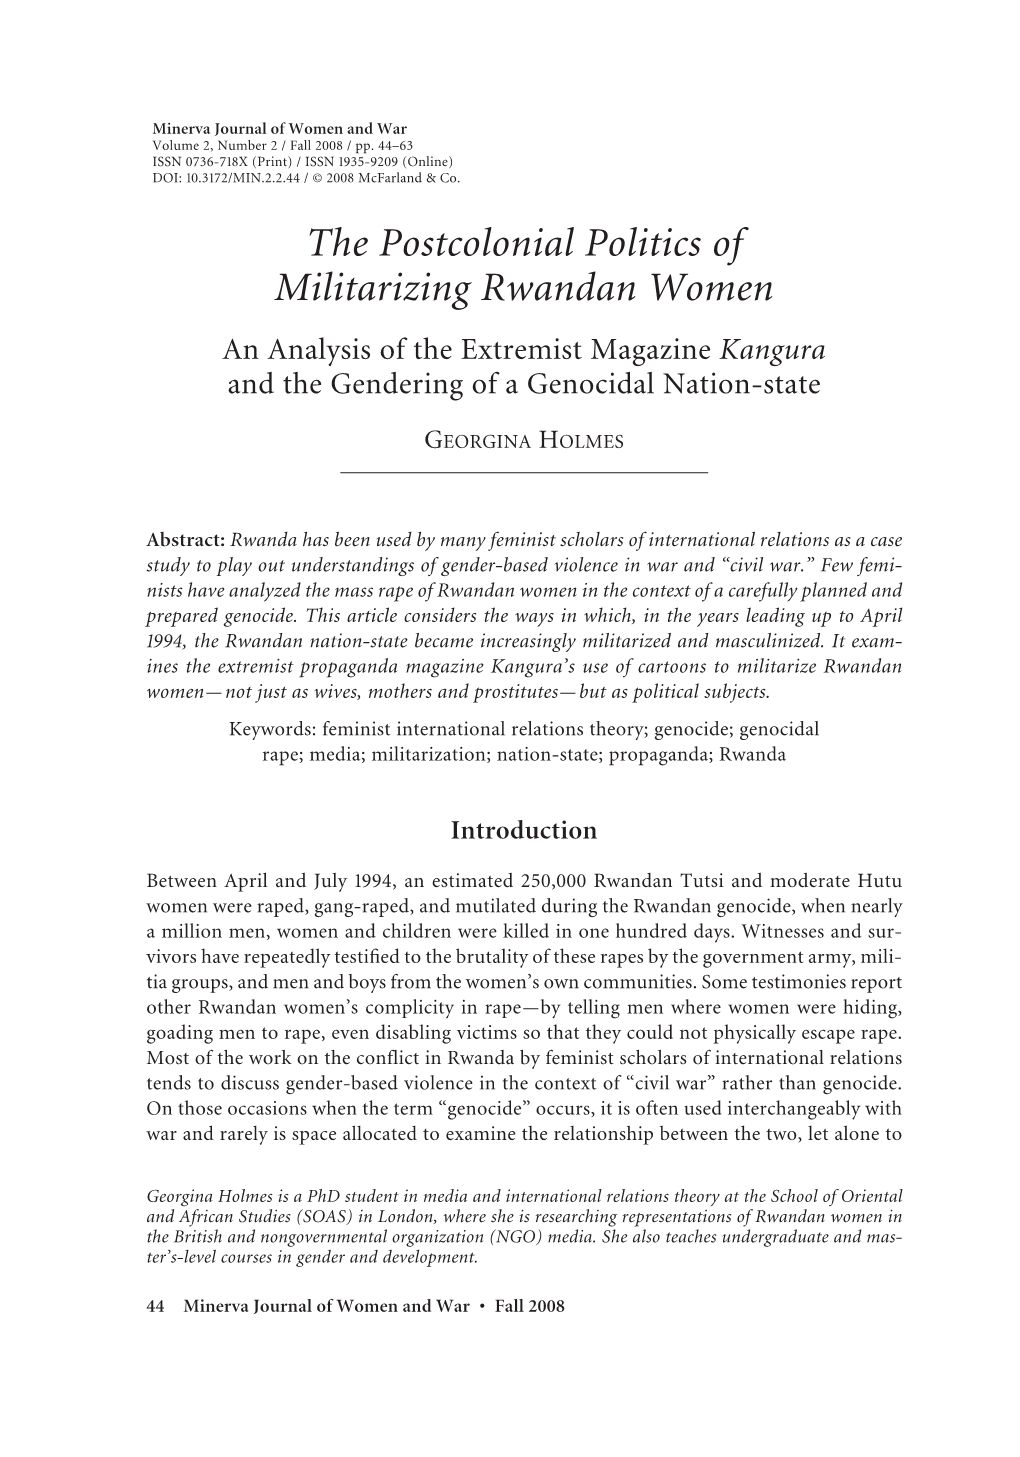 The Postcolonial Politics of Militarizing Rwandan Women an Analysis of the Extremist Magazine Kangura and the Gendering of a Genocidal Nation-State